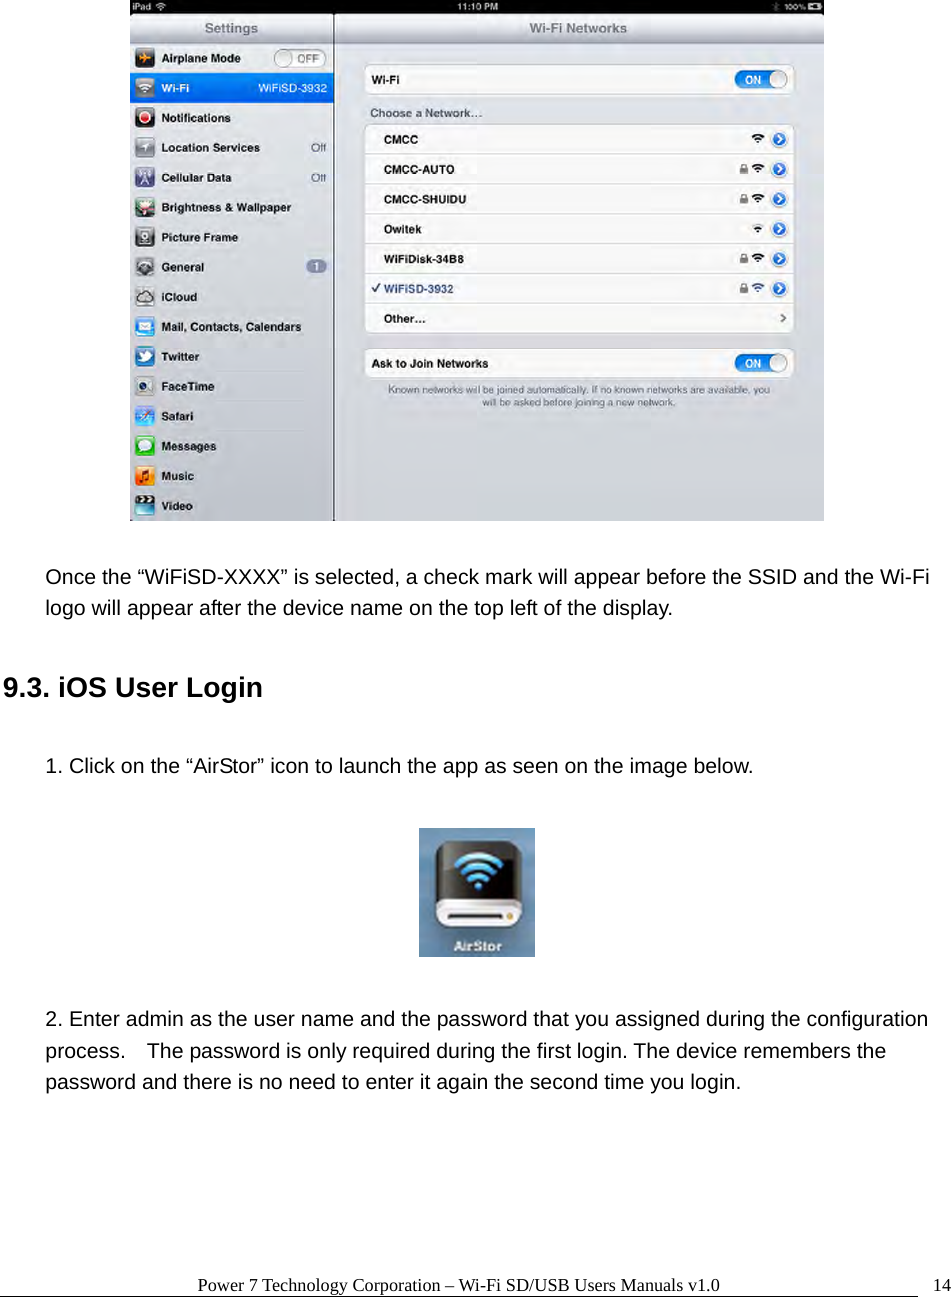 Power 7 Technology Corporation – Wi-Fi SD/USB Users Manuals v1.0  14   Once the “WiFiSD-XXXX” is selected, a check mark will appear before the SSID and the Wi-Fi logo will appear after the device name on the top left of the display.  9.3. iOS User Login  1. Click on the “AirStor” icon to launch the app as seen on the image below.    2. Enter admin as the user name and the password that you assigned during the configuration process.    The password is only required during the first login. The device remembers the password and there is no need to enter it again the second time you login.  